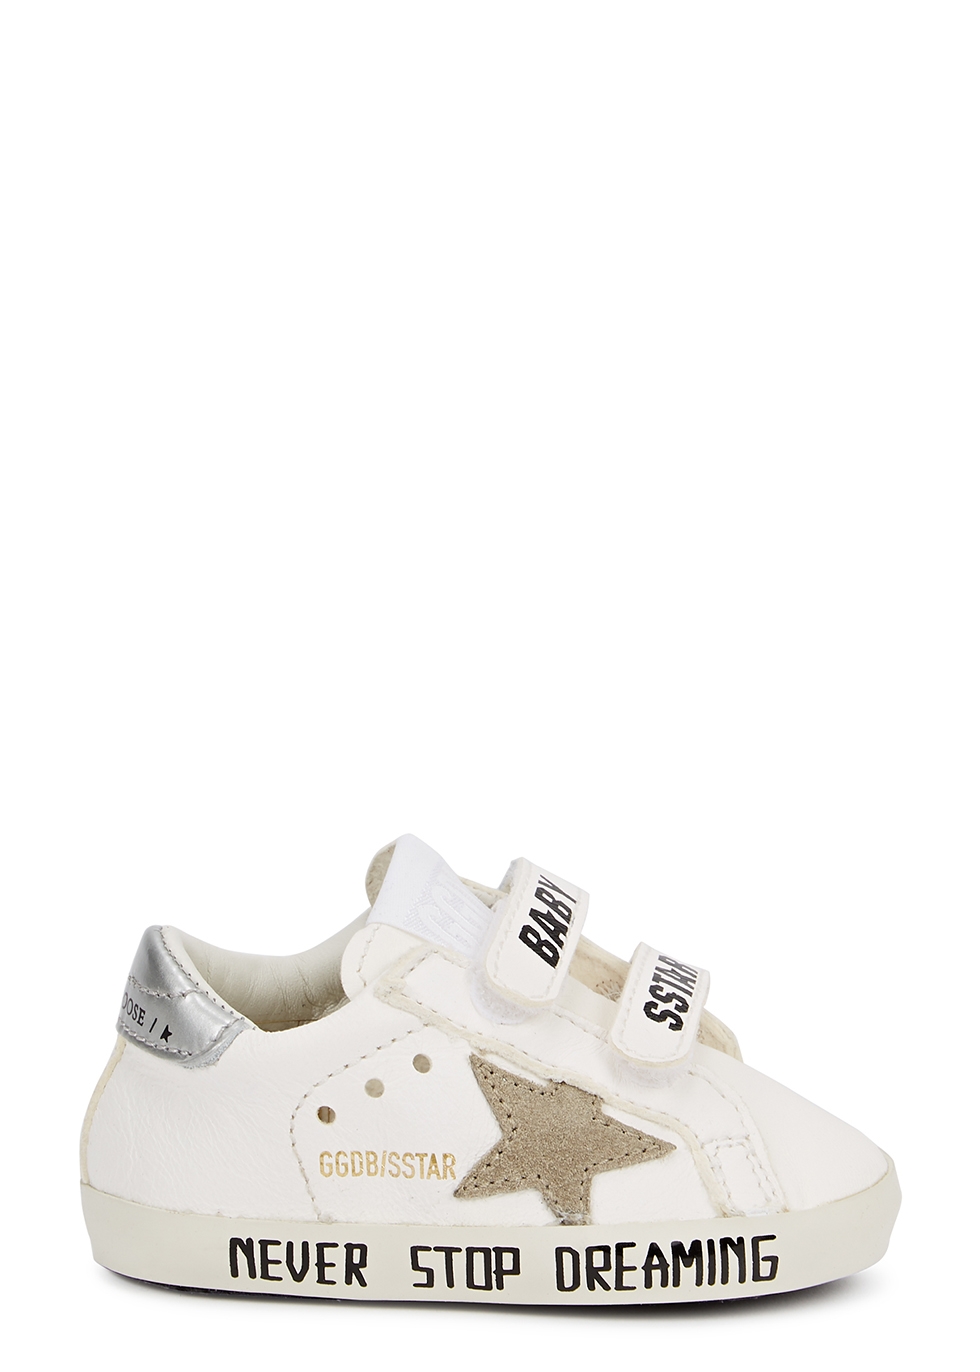 KIDS Baby School white distressed leather sneakers